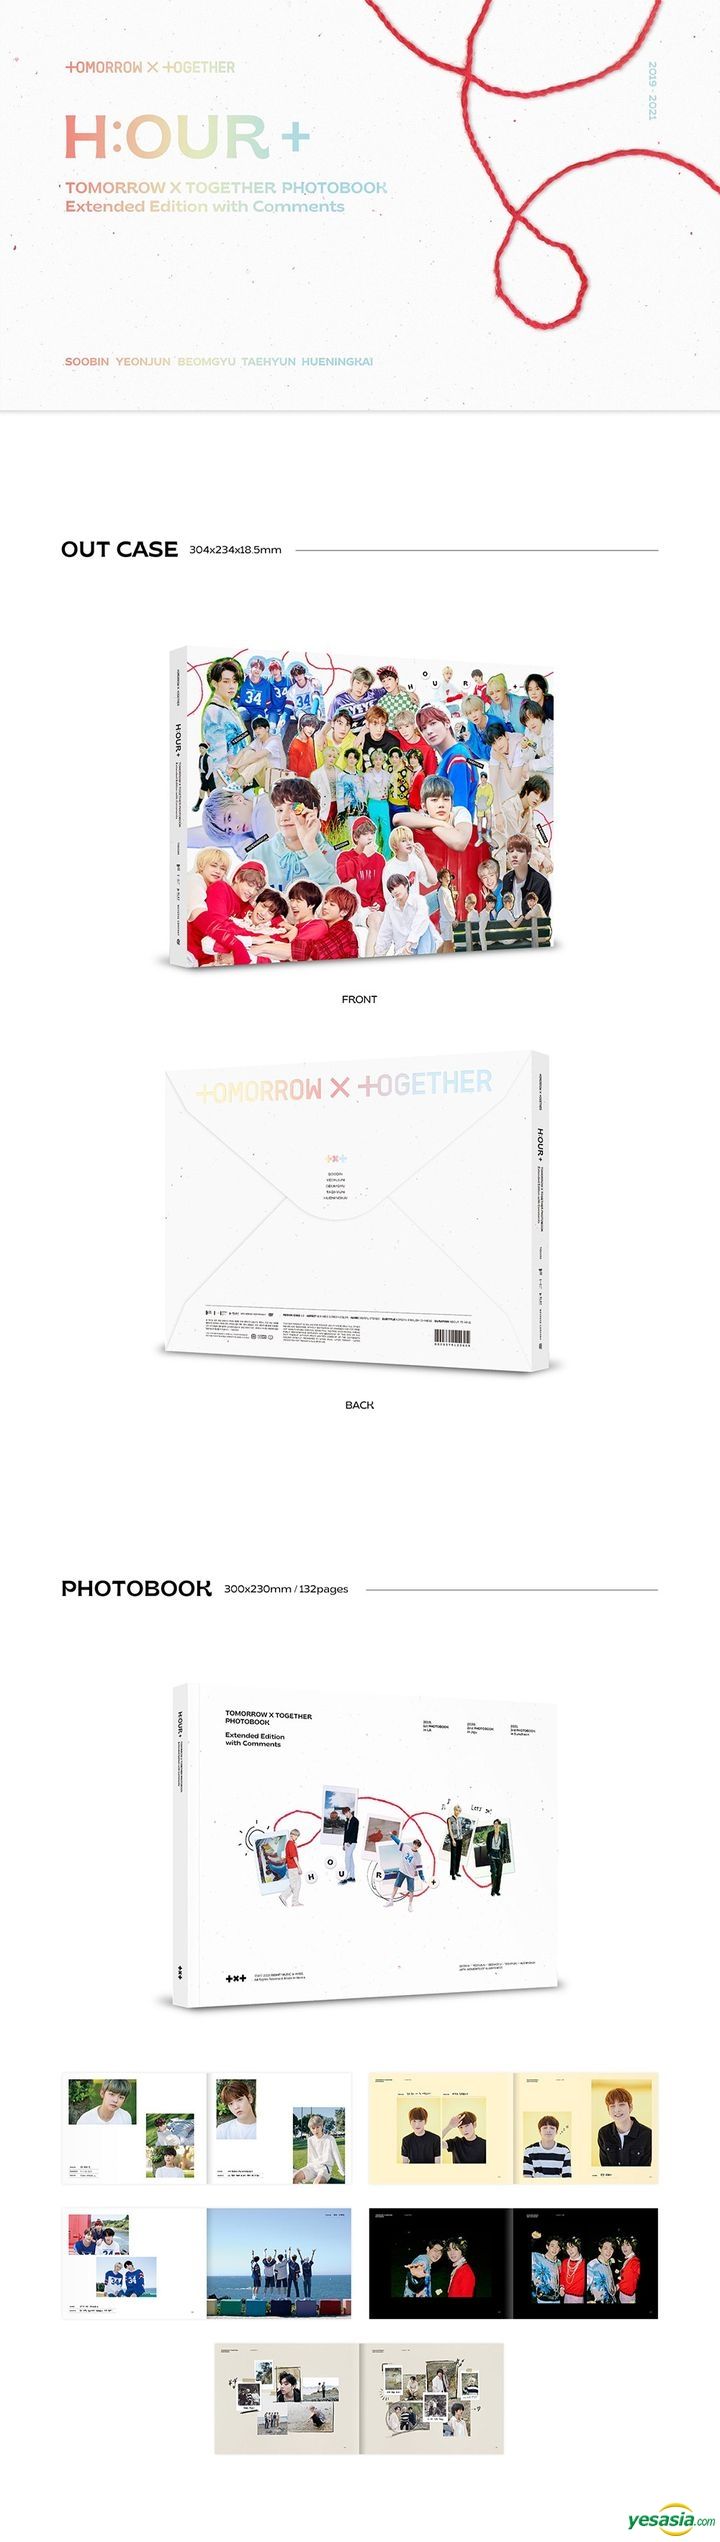 YESASIA: TXT Photobook - H:OUR+ Set (3rd Photobook + Extended 